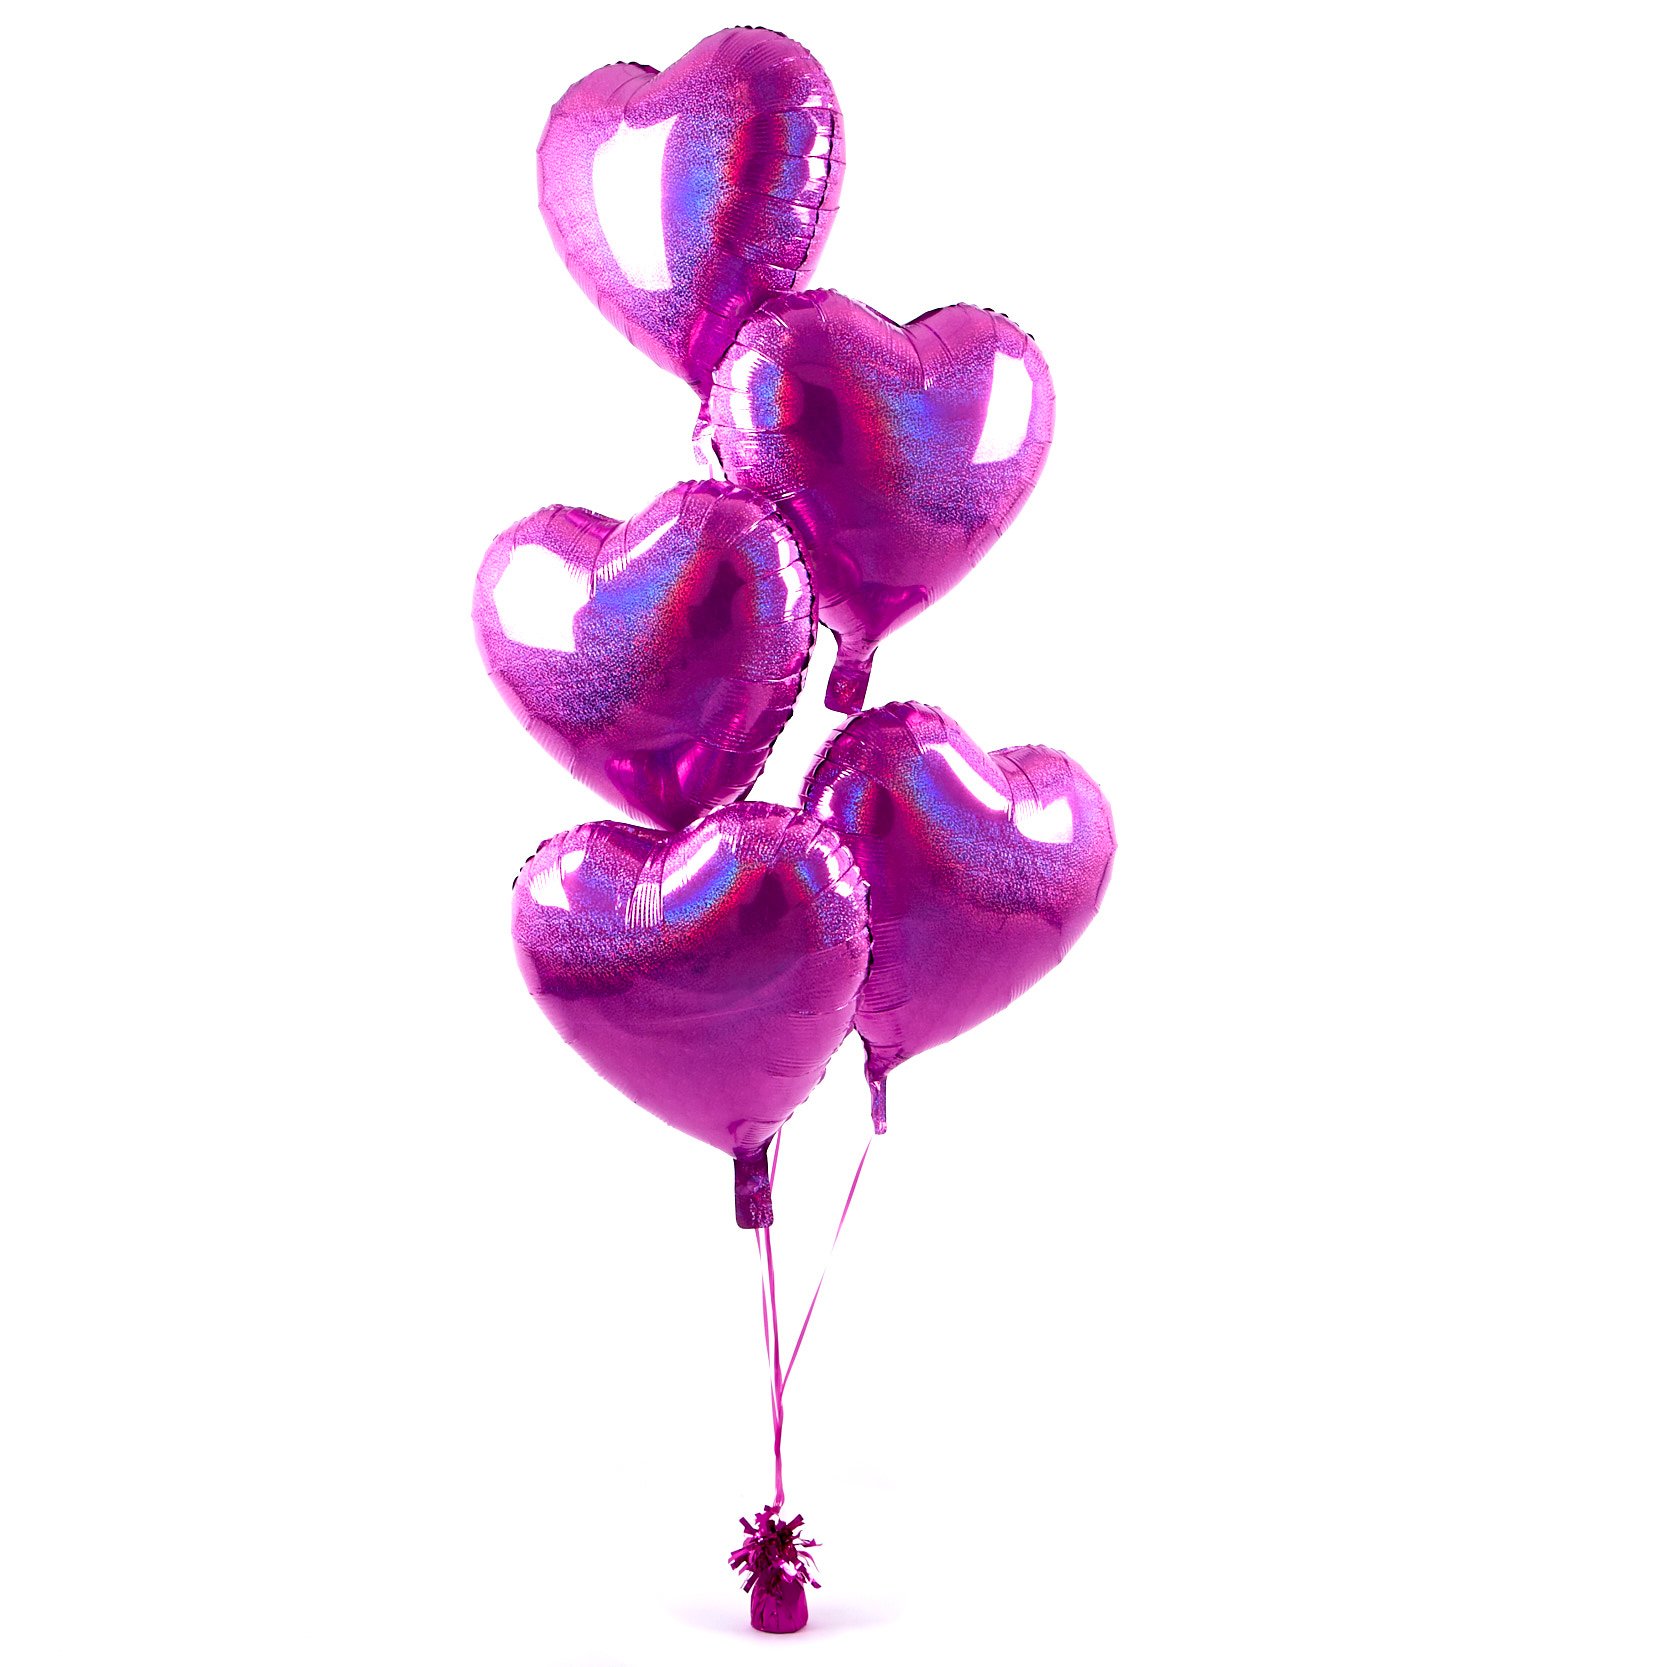 5 Pink Hearts Balloon Bouquet - DELIVERED INFLATED!